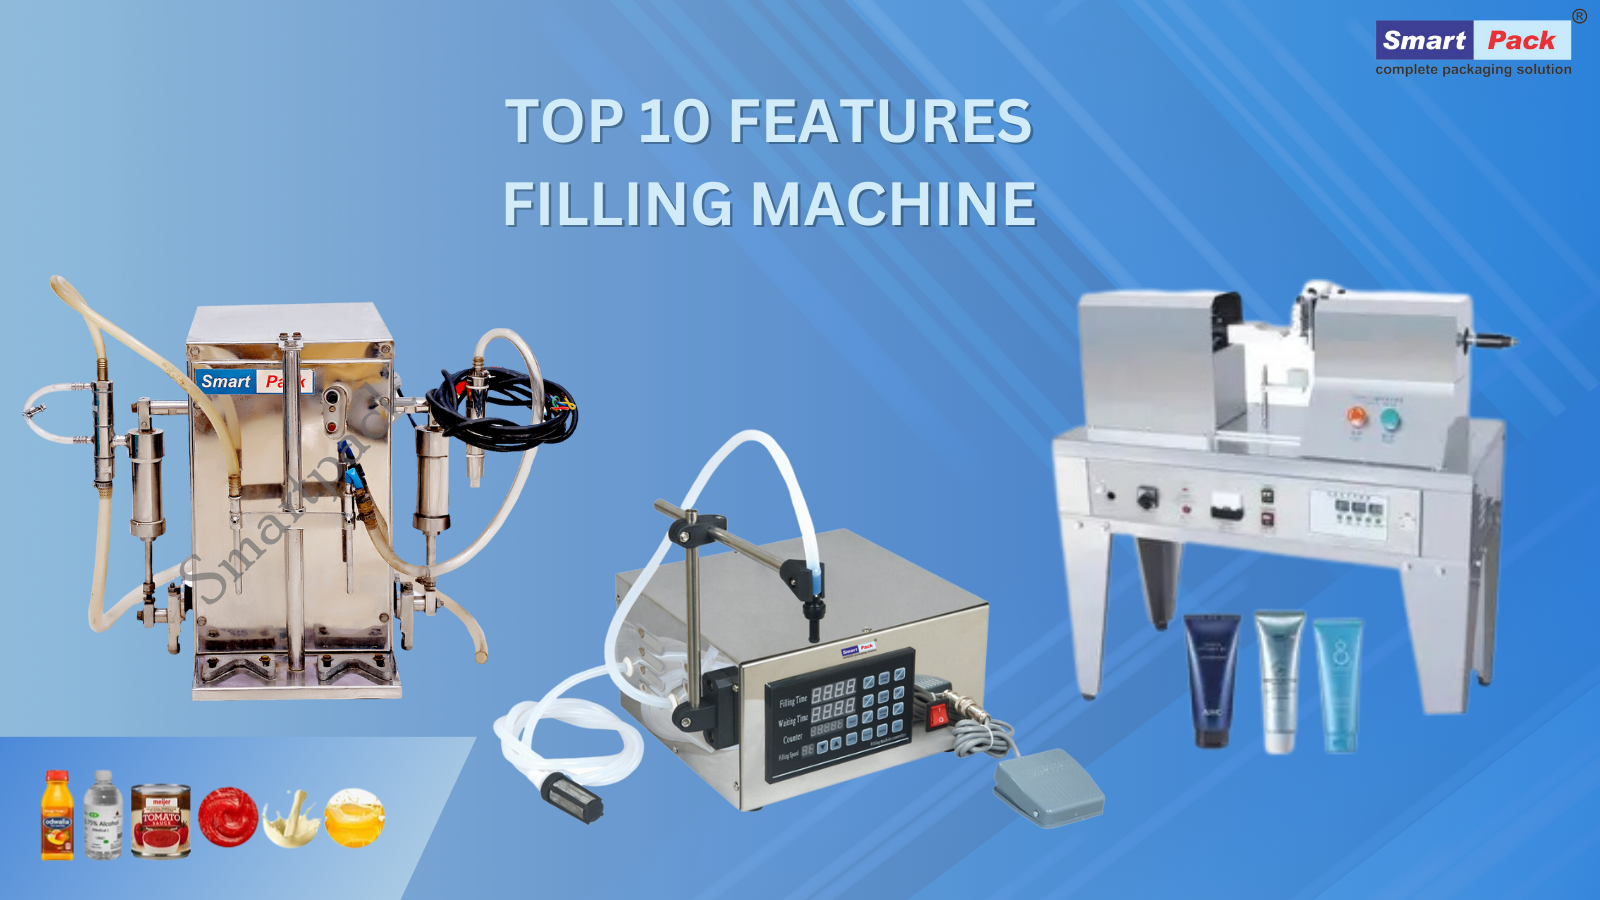 The Top 10 Features to Look for When Buying a Filling Machine